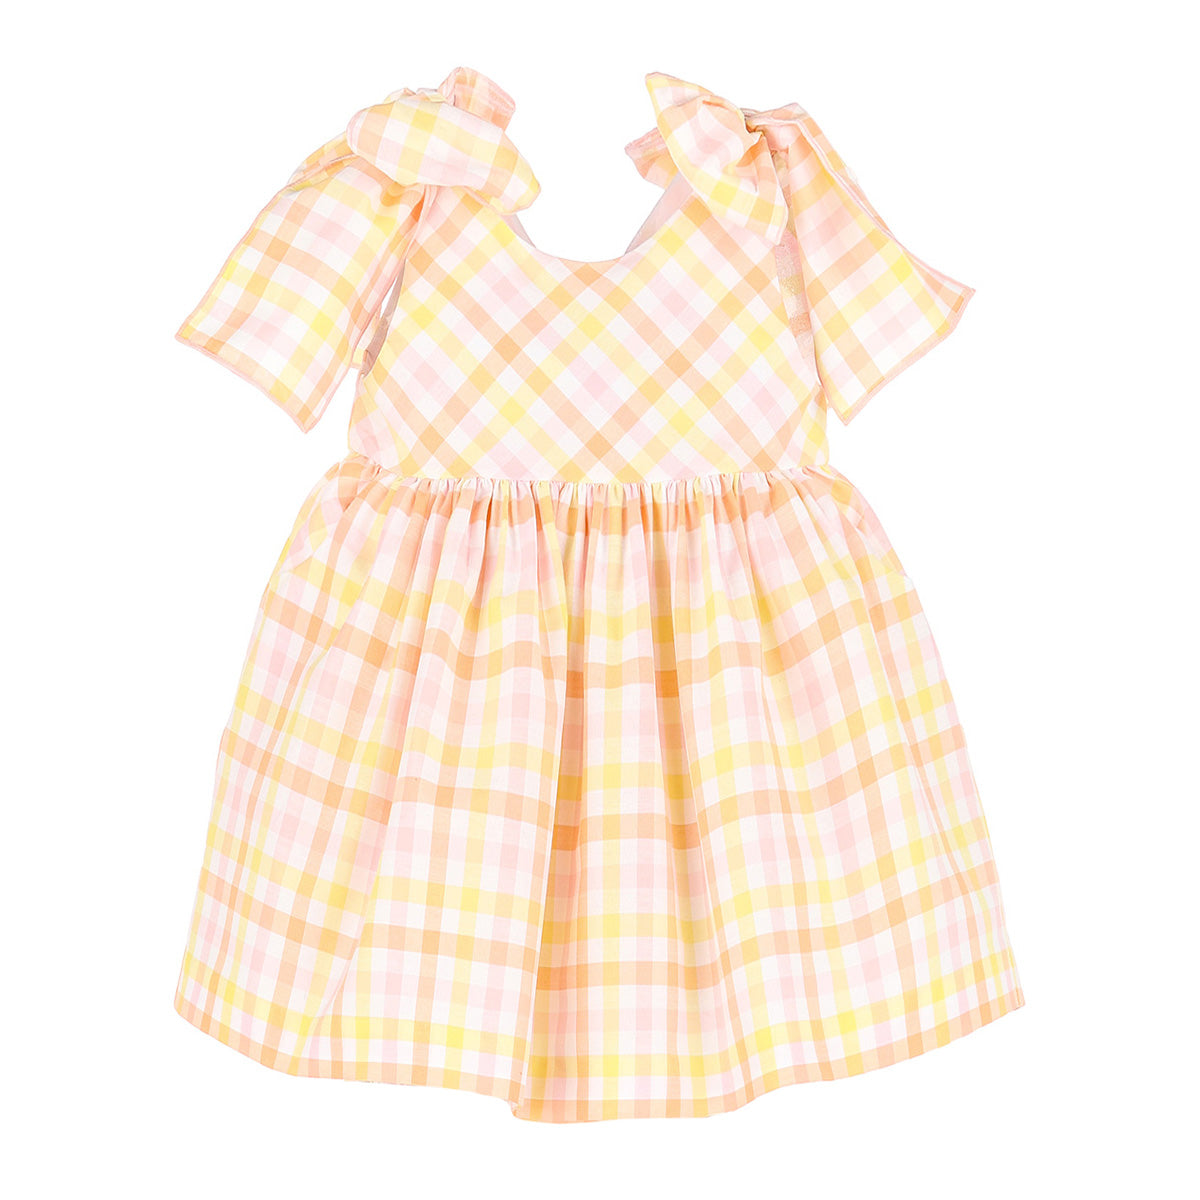 Toddler Girl Pastel Pink and Yellow Plaid Bow Dress Sophie & Lucas